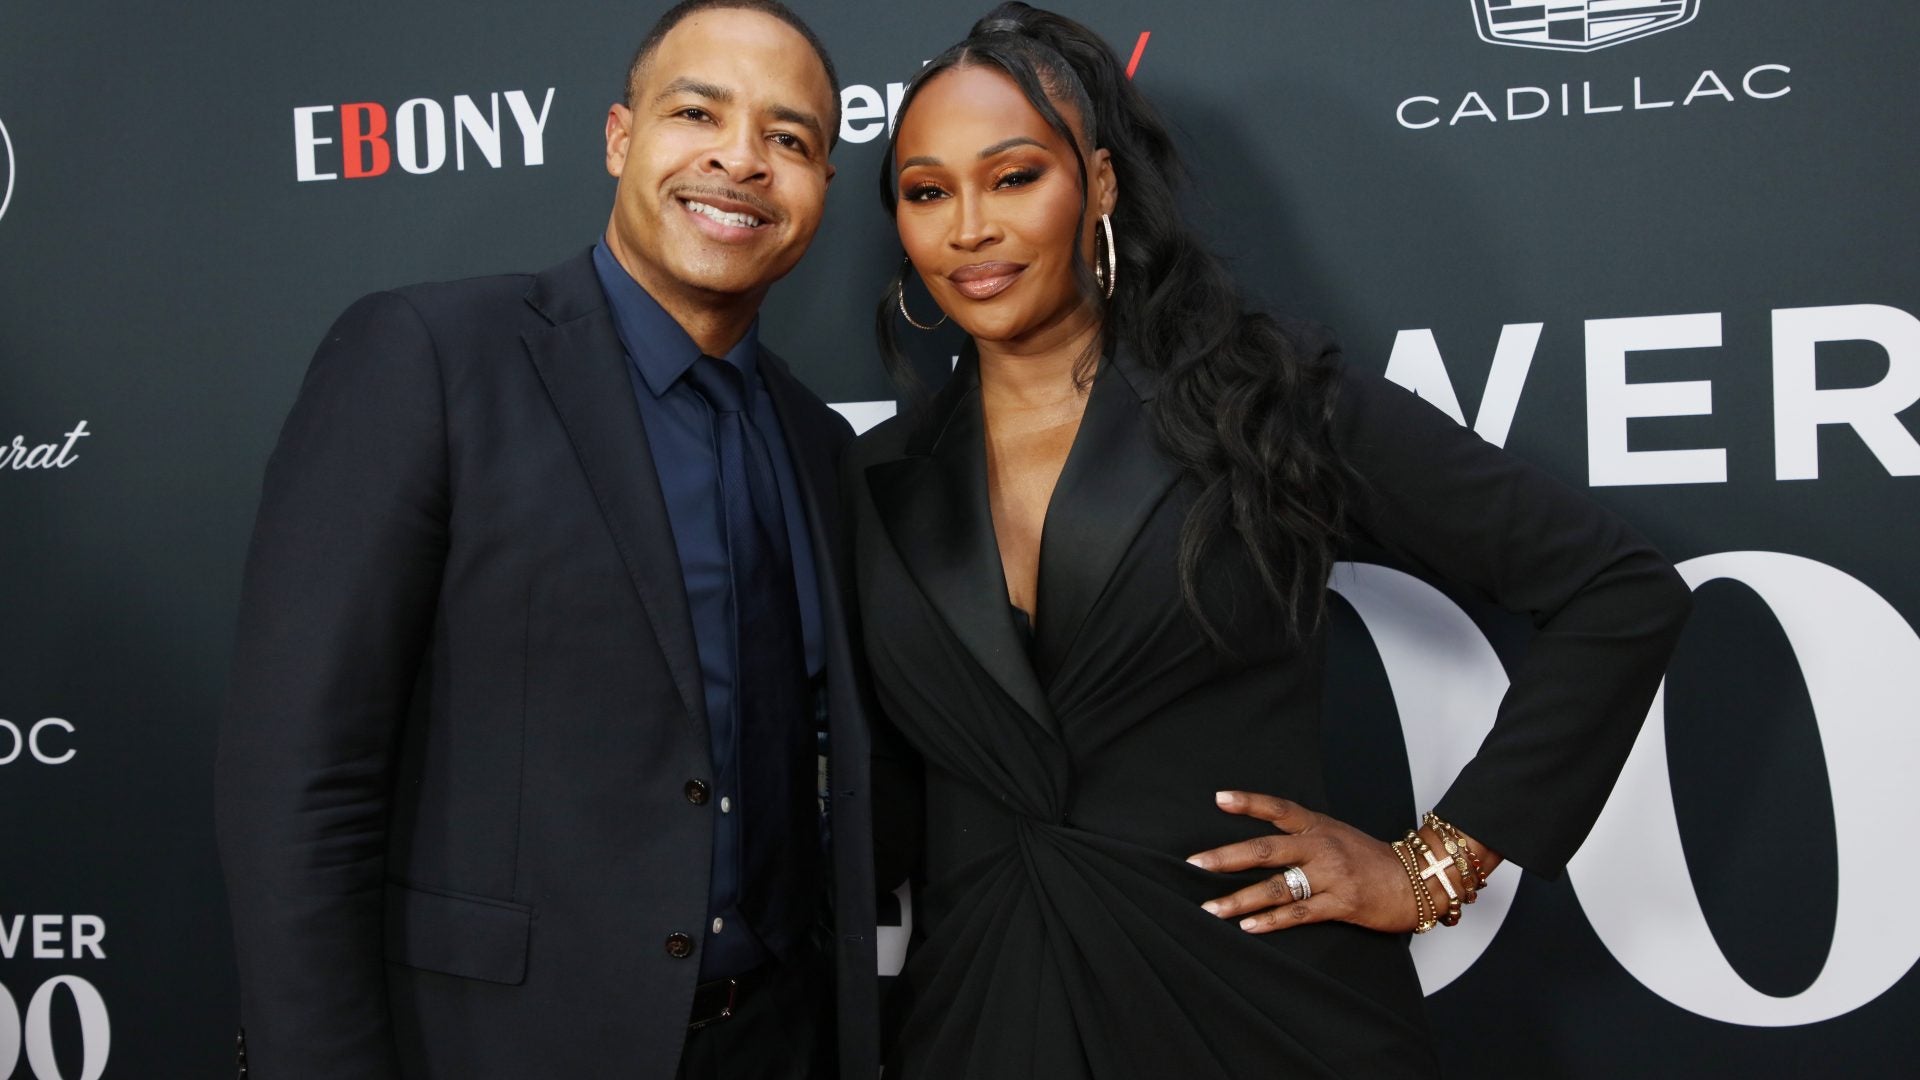 Cynthia Bailey Exited 'Real Housewives Of Atlanta' To Focus On Her Marriage